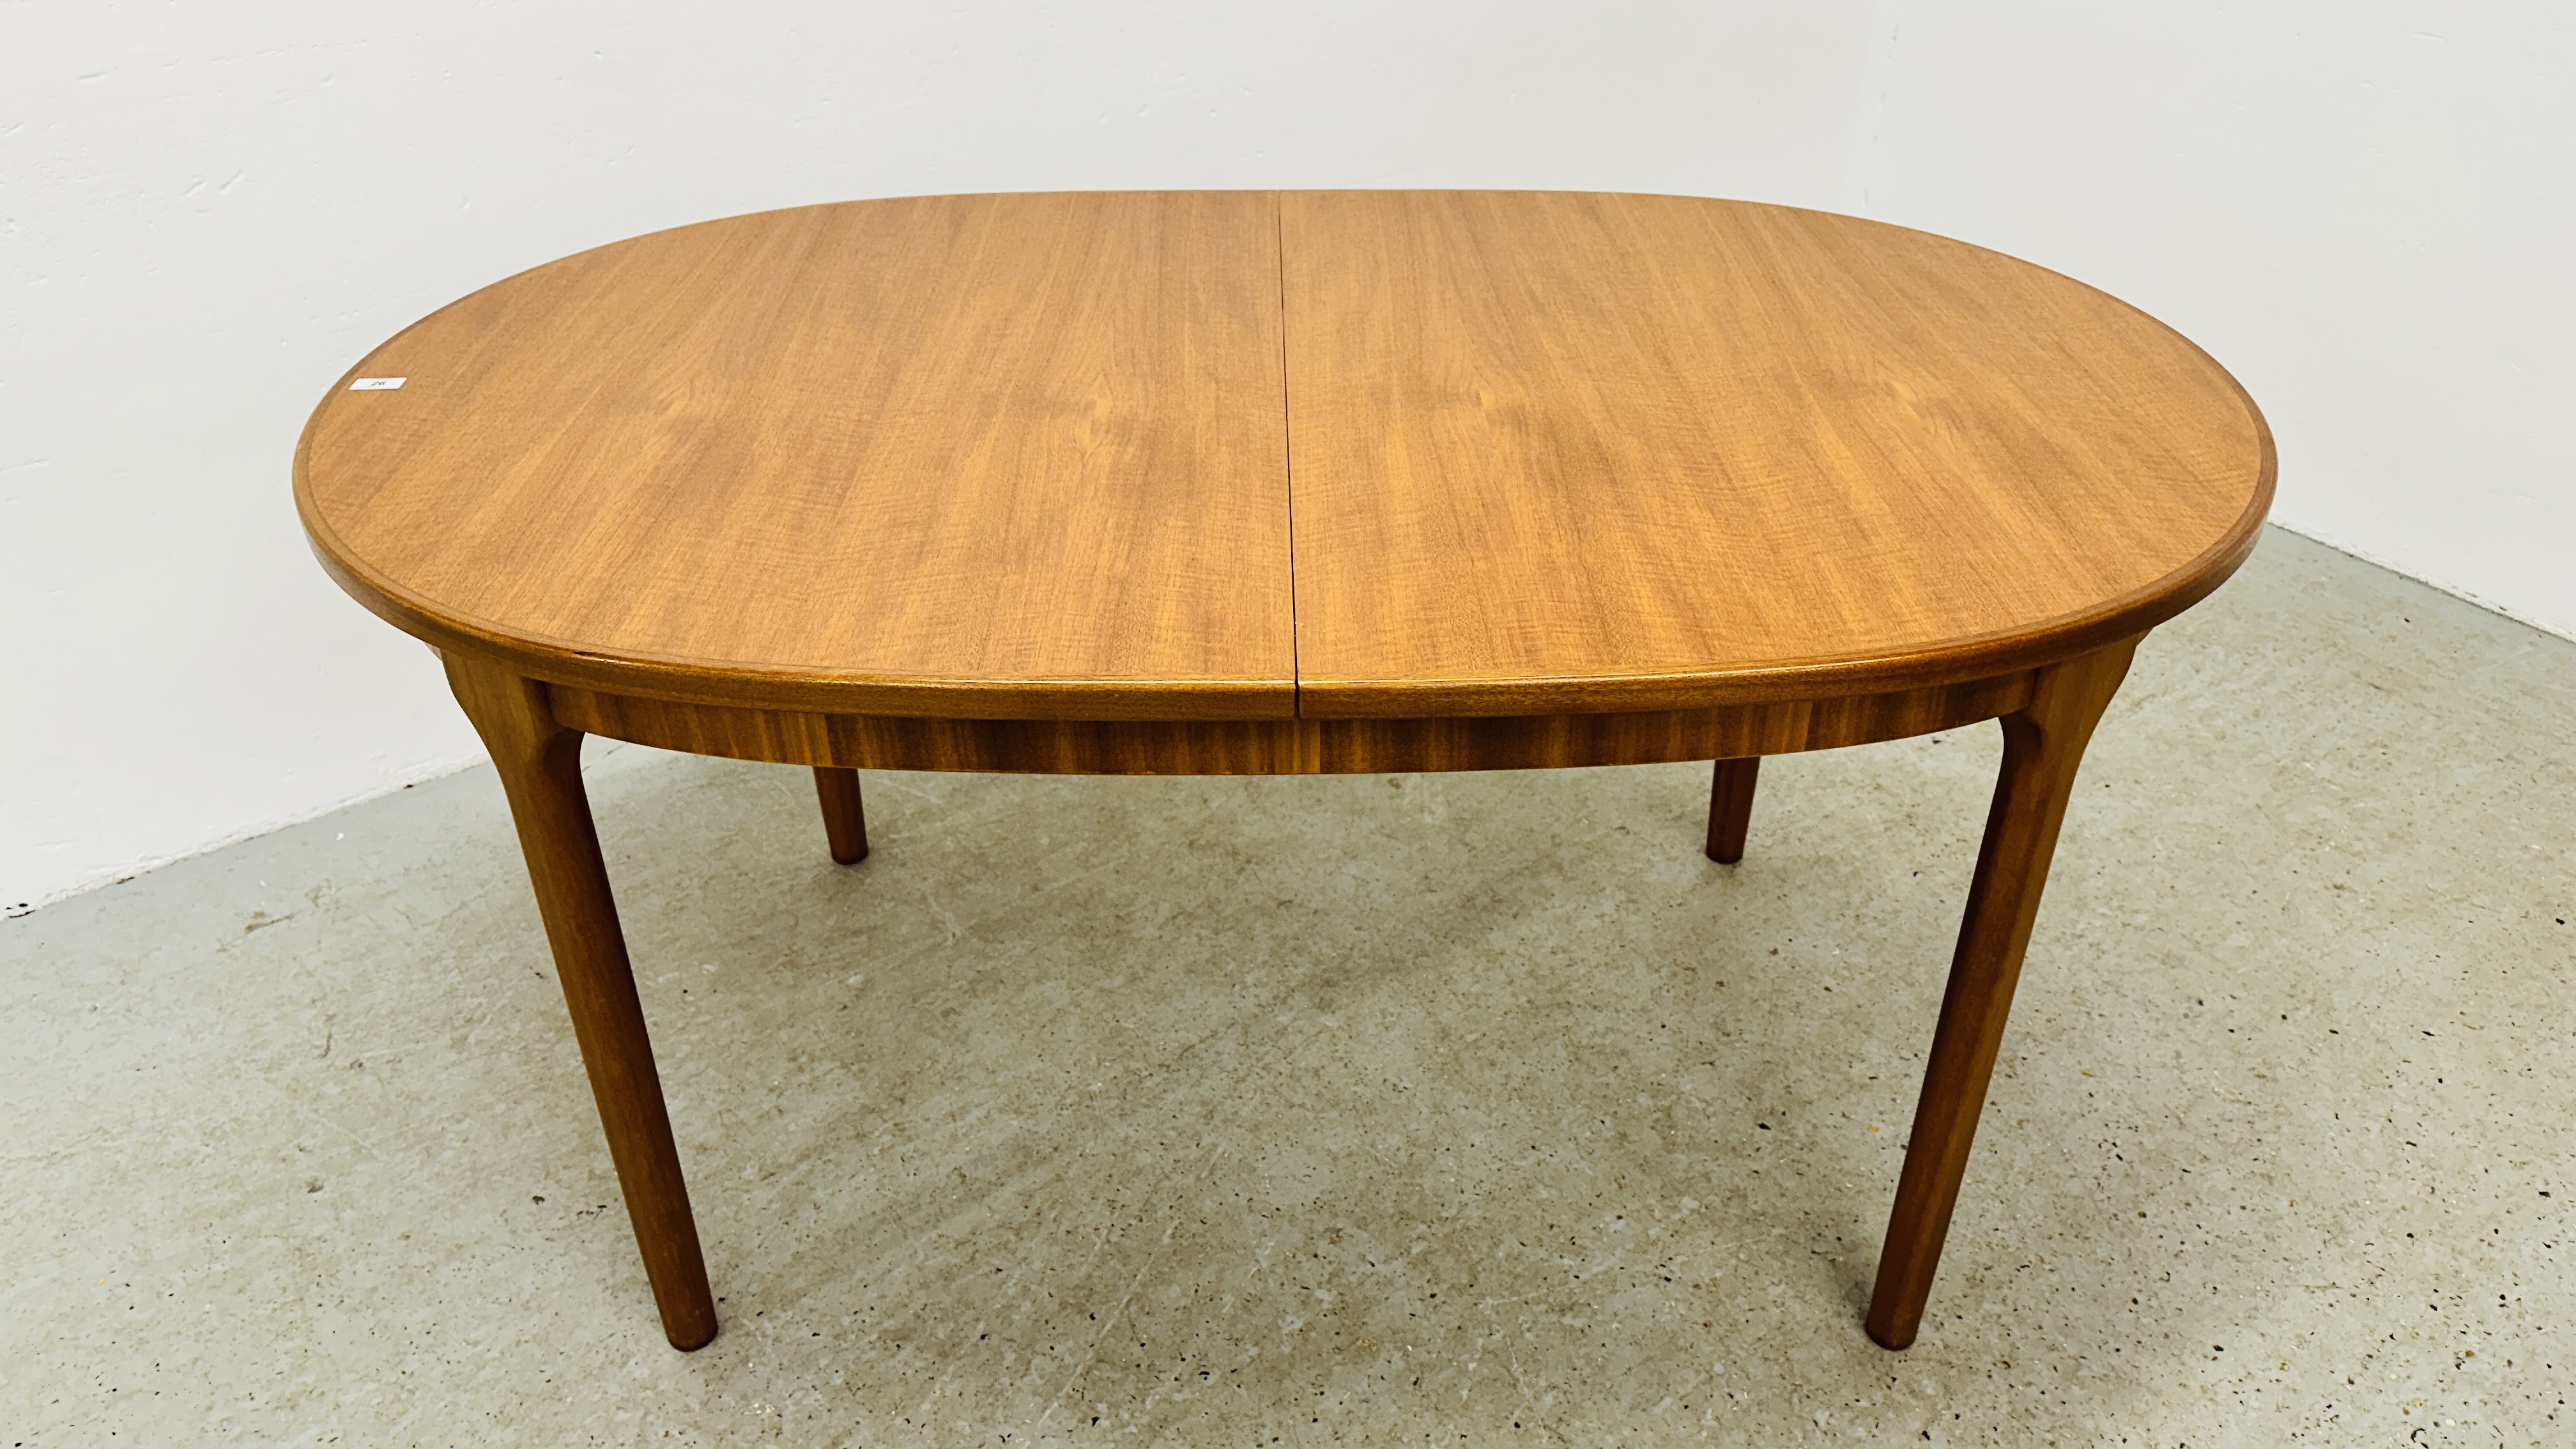 A MID CENTURY TEAK FINISH OVAL EXTENDING DINING TABLE BEARING ORIGINAL MAKERS LABEL "A.H.